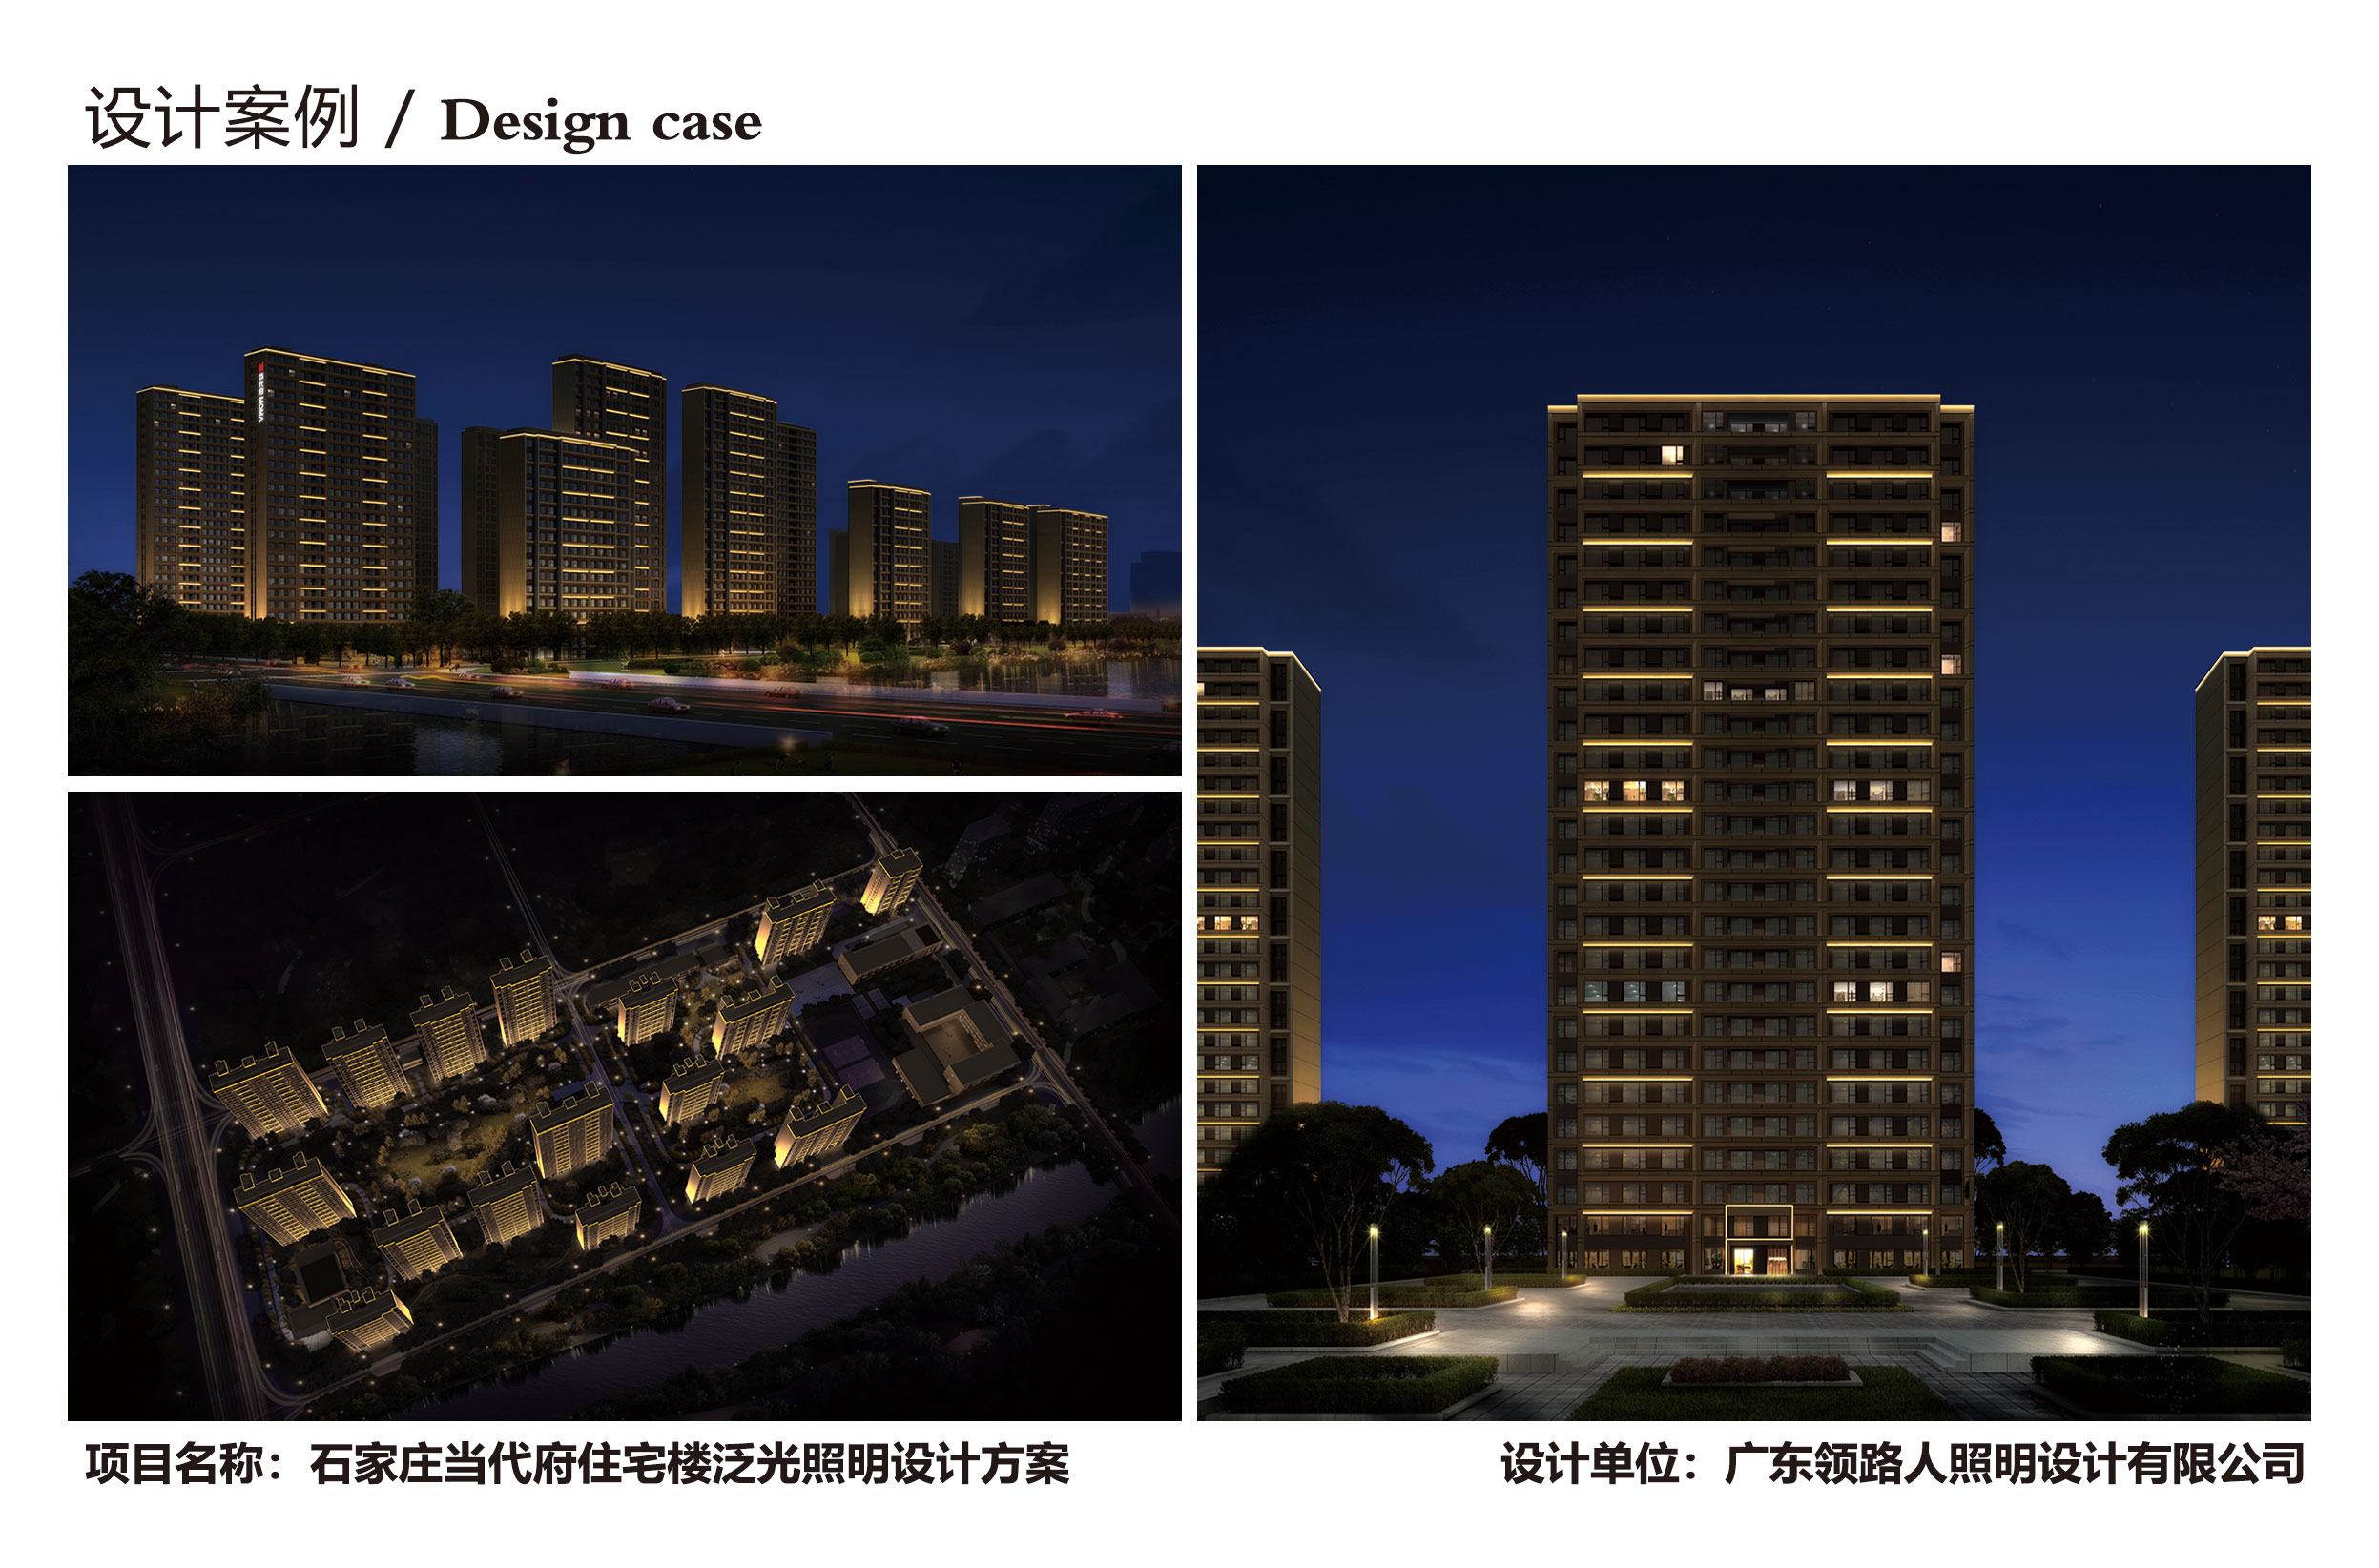 Flood Lighting Design Scheme of Shijiazhuang Contemporary House Residential Building